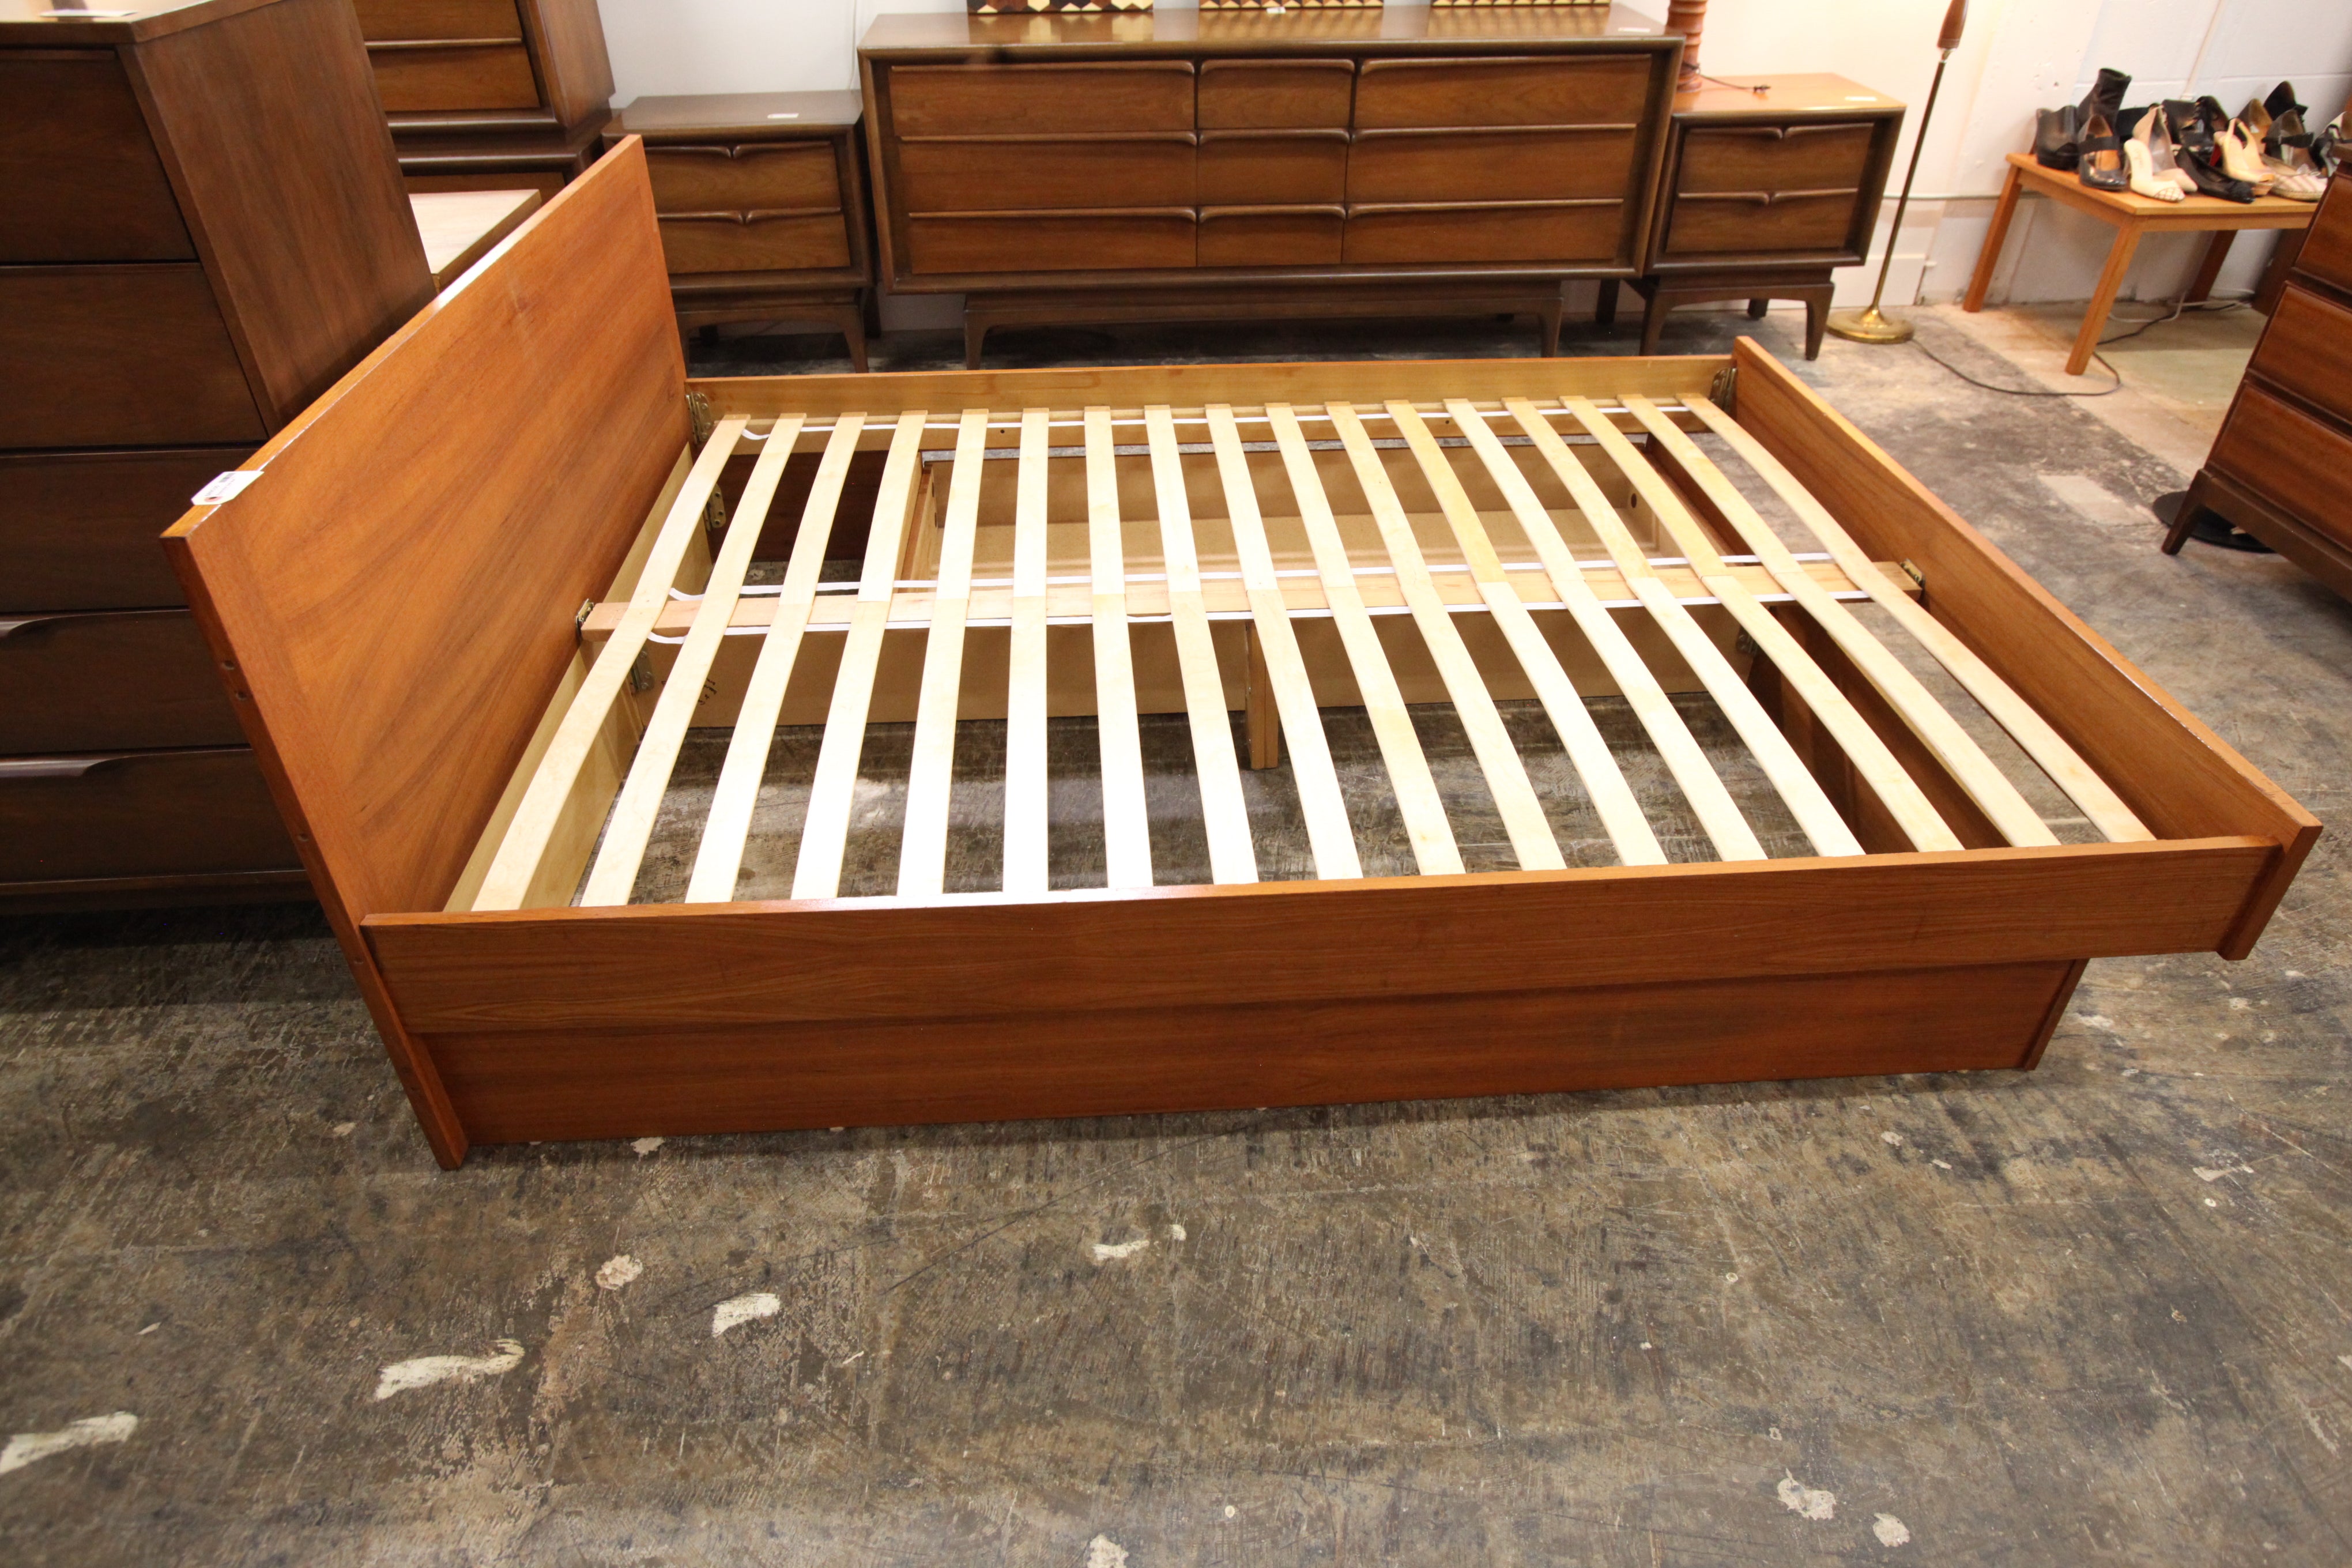 Vintage Queen Teak Bed w/ Pullout Drawer (62.5"W x 31.75"H x 82"D)